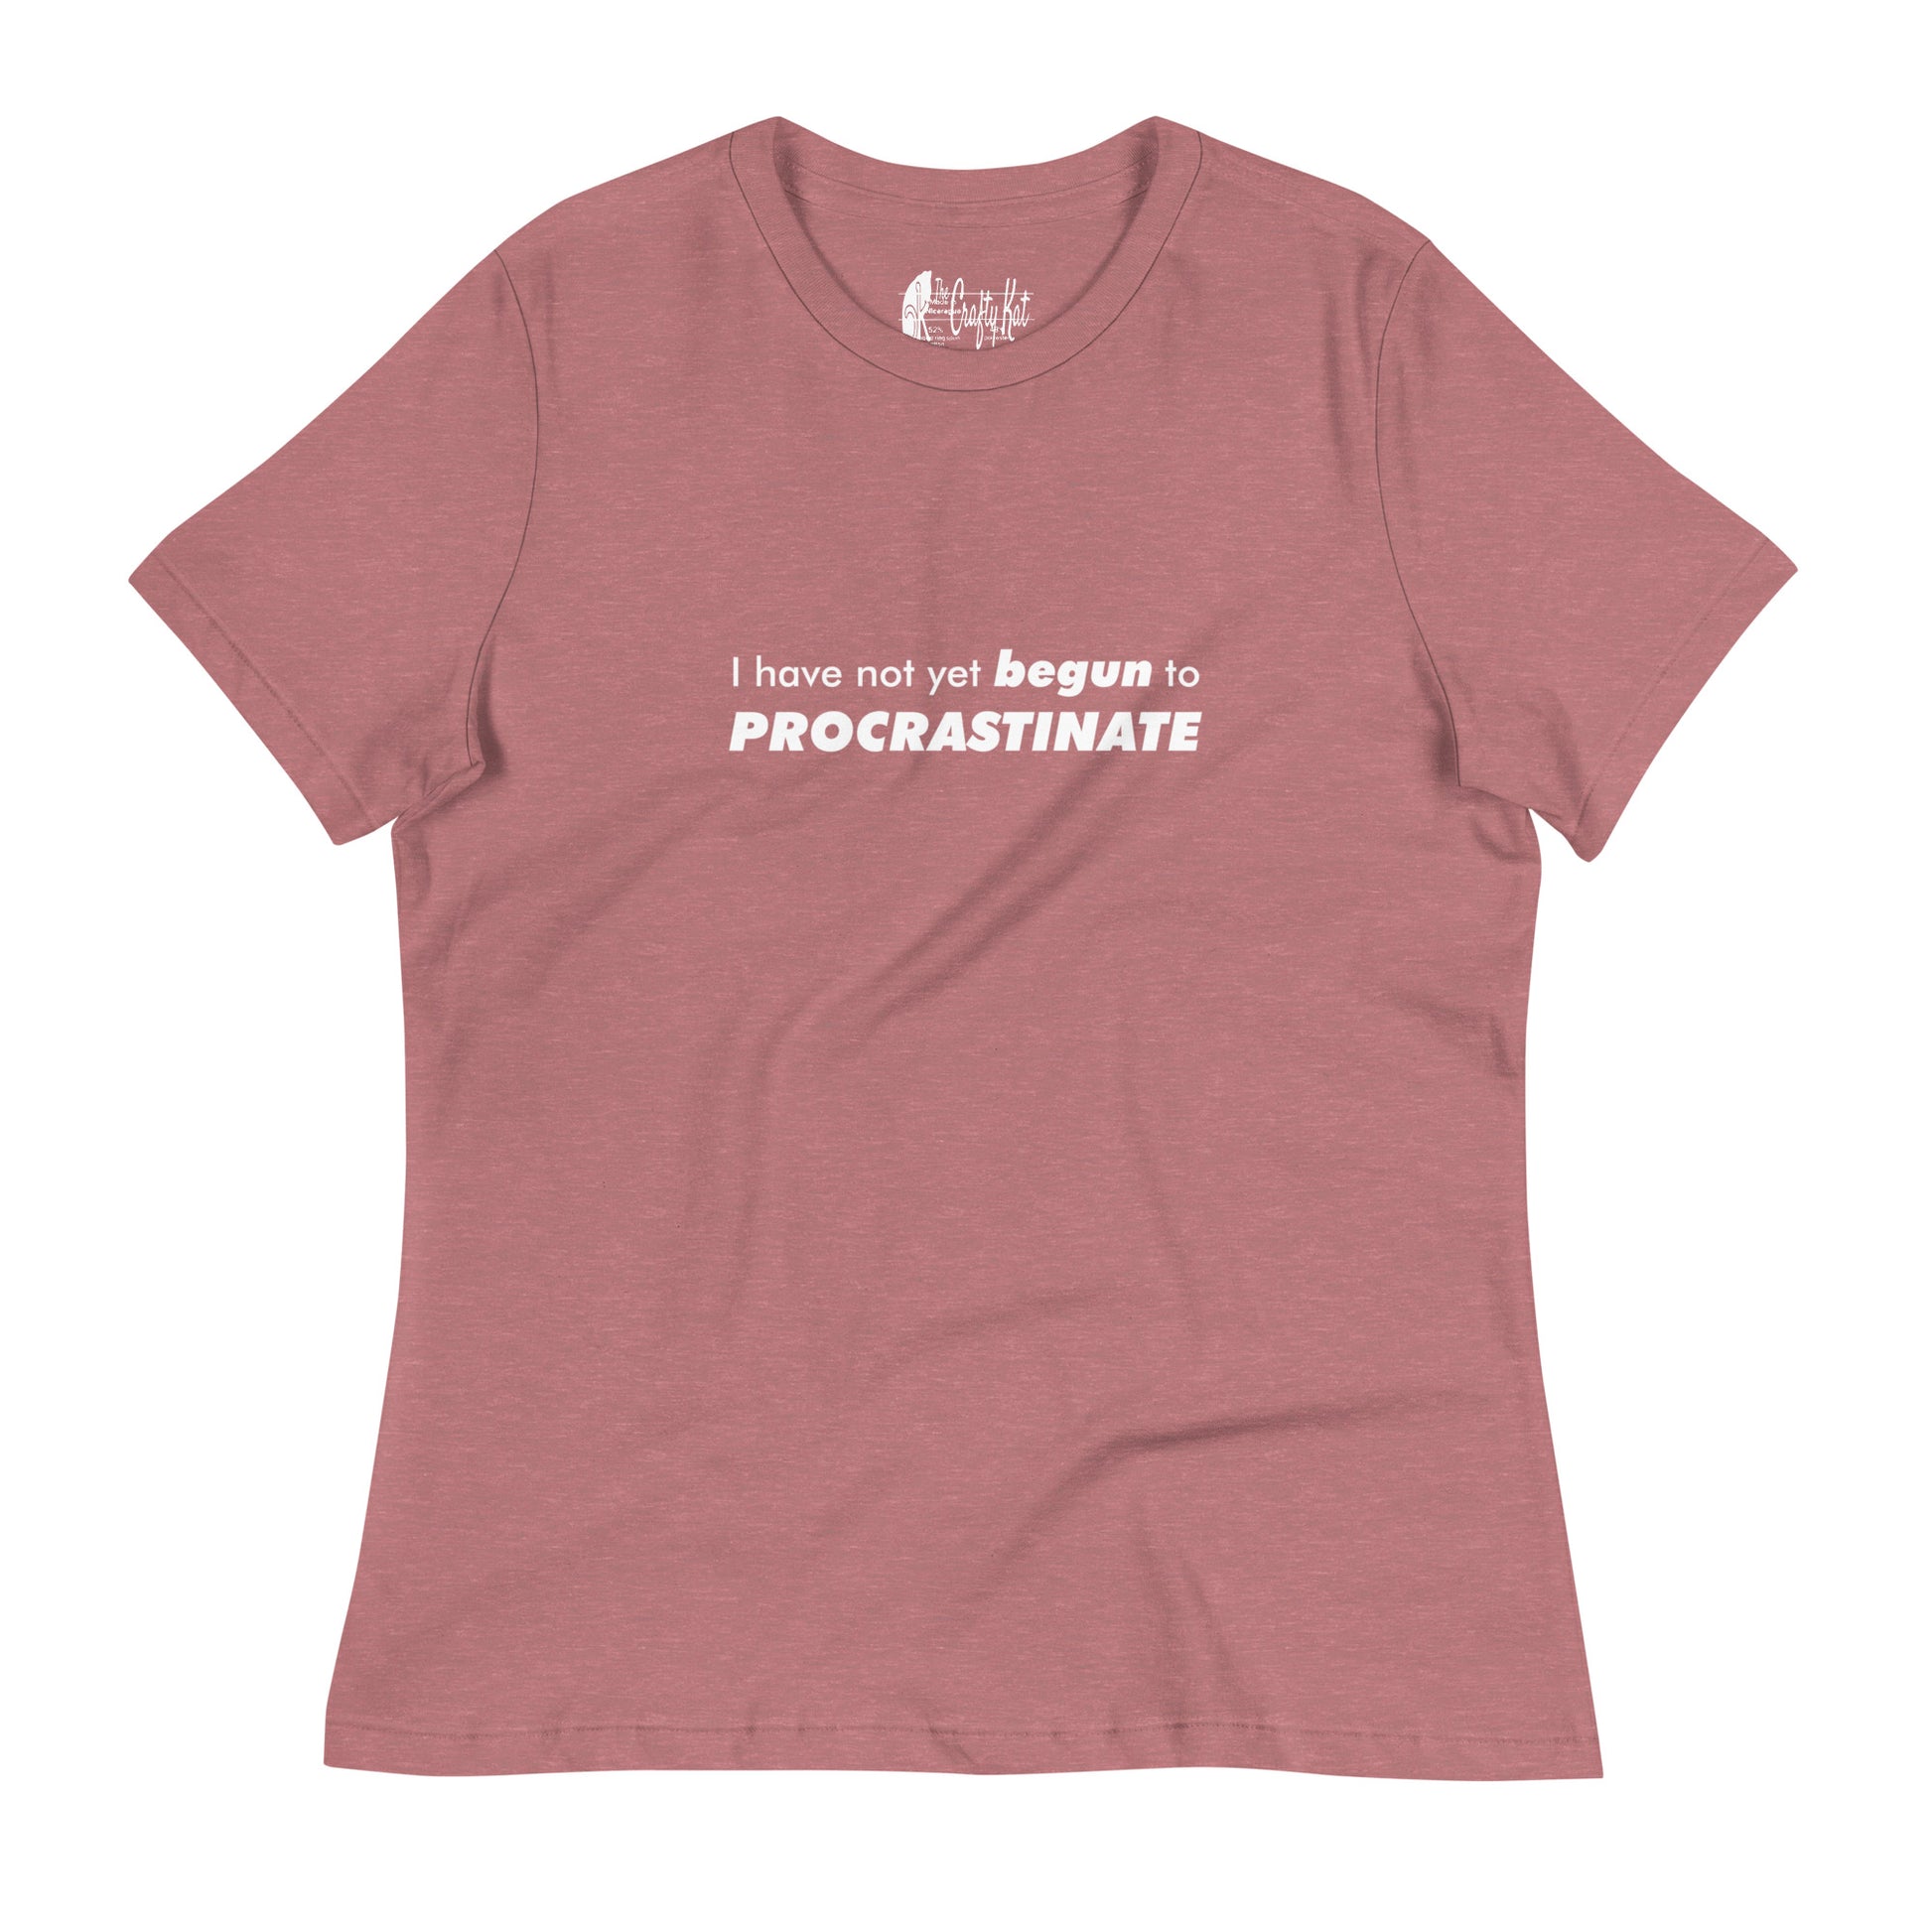 Heather Mauve women's relaxed-fit t-shirt with text graphic: "I have not yet BEGUN to PROCRASTINATE"